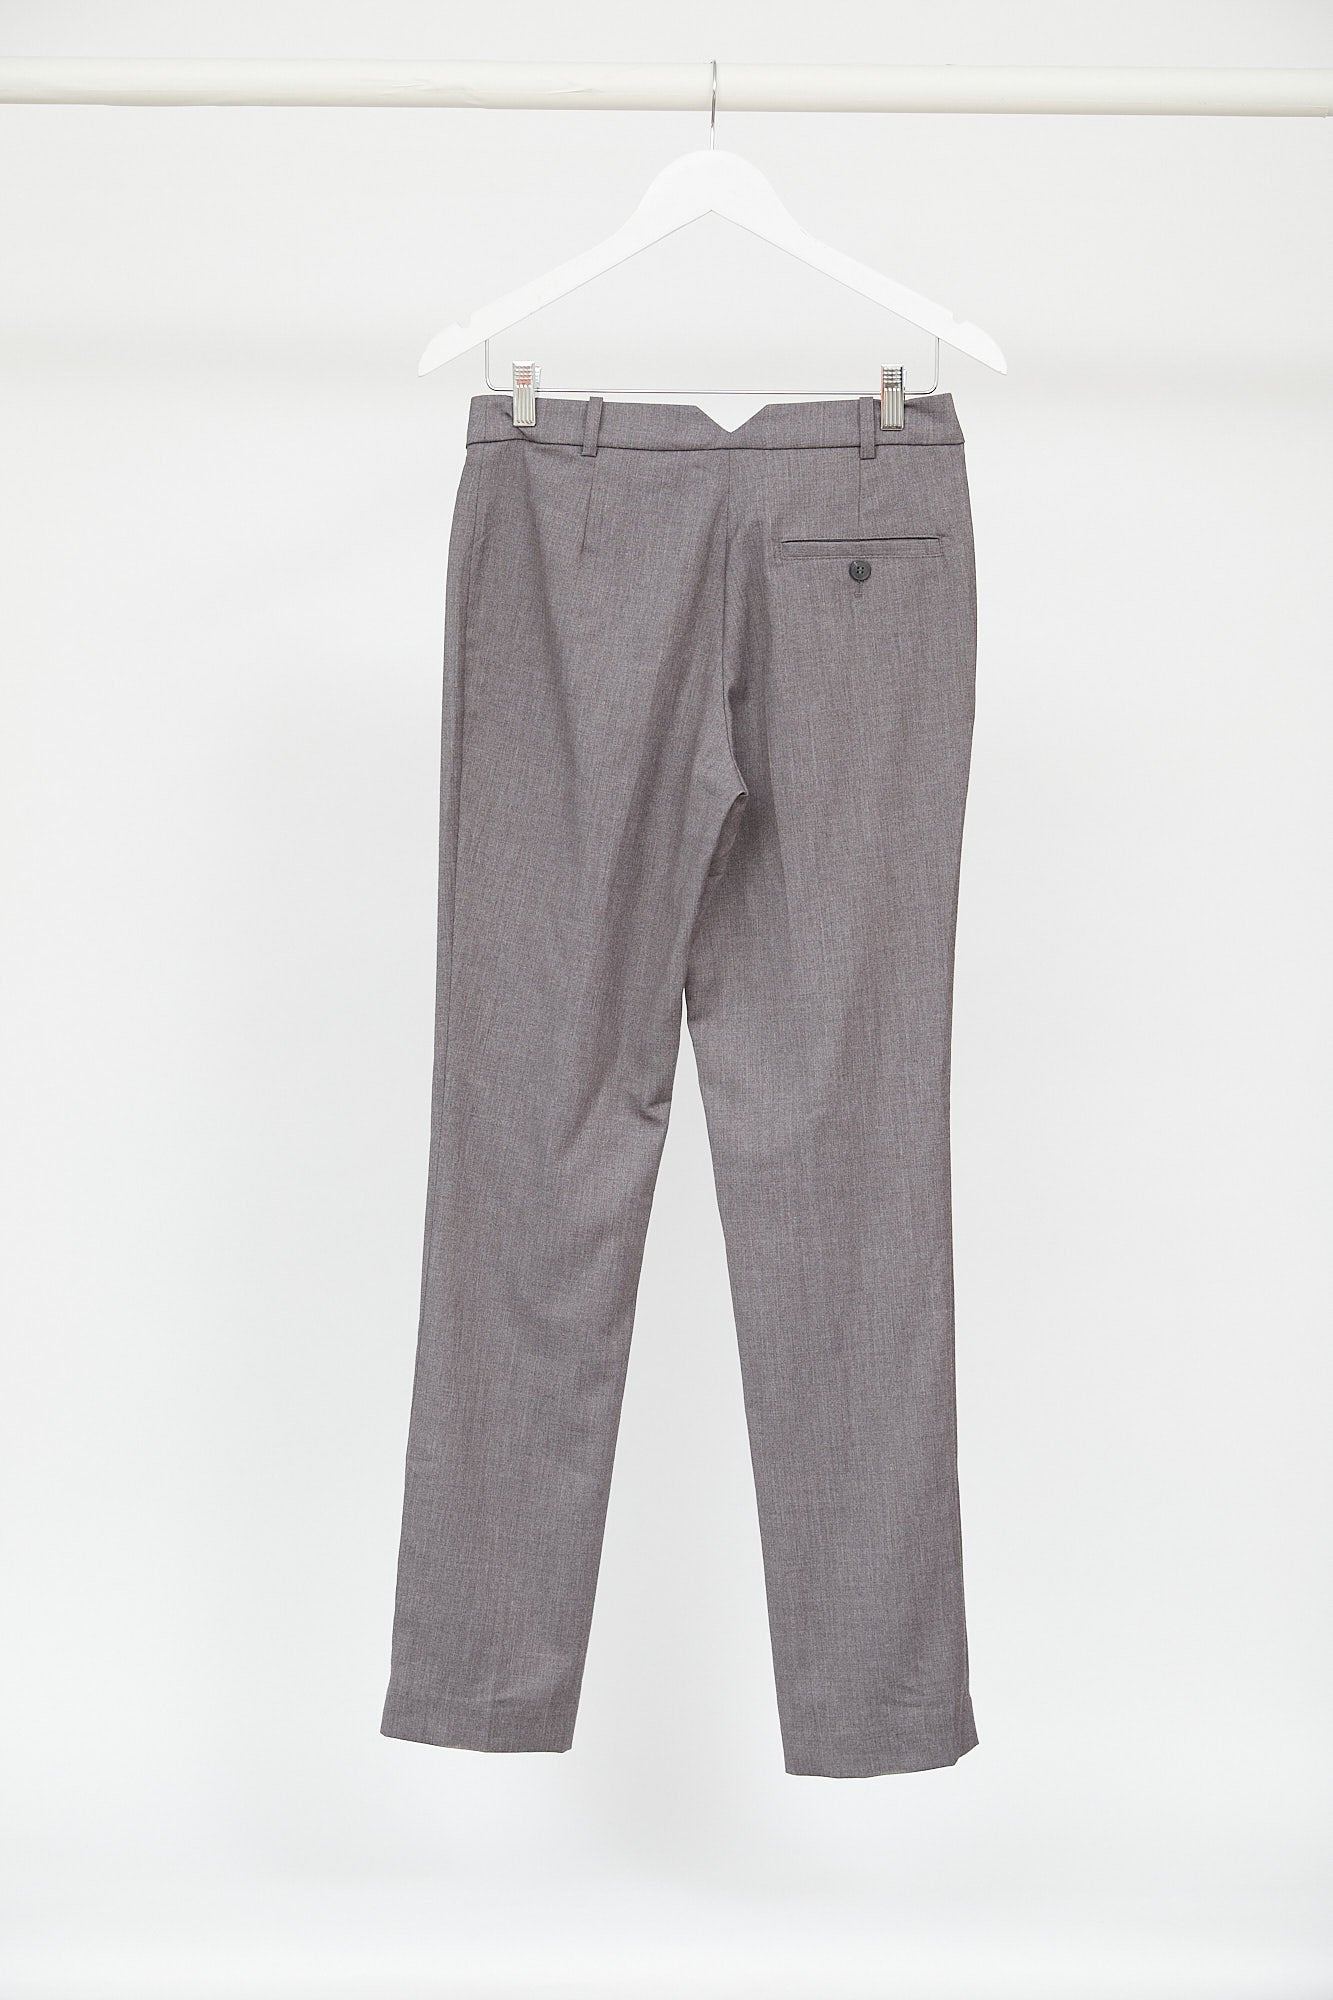 Womens Grey H&M Suit Trousers: Size 10 or Small